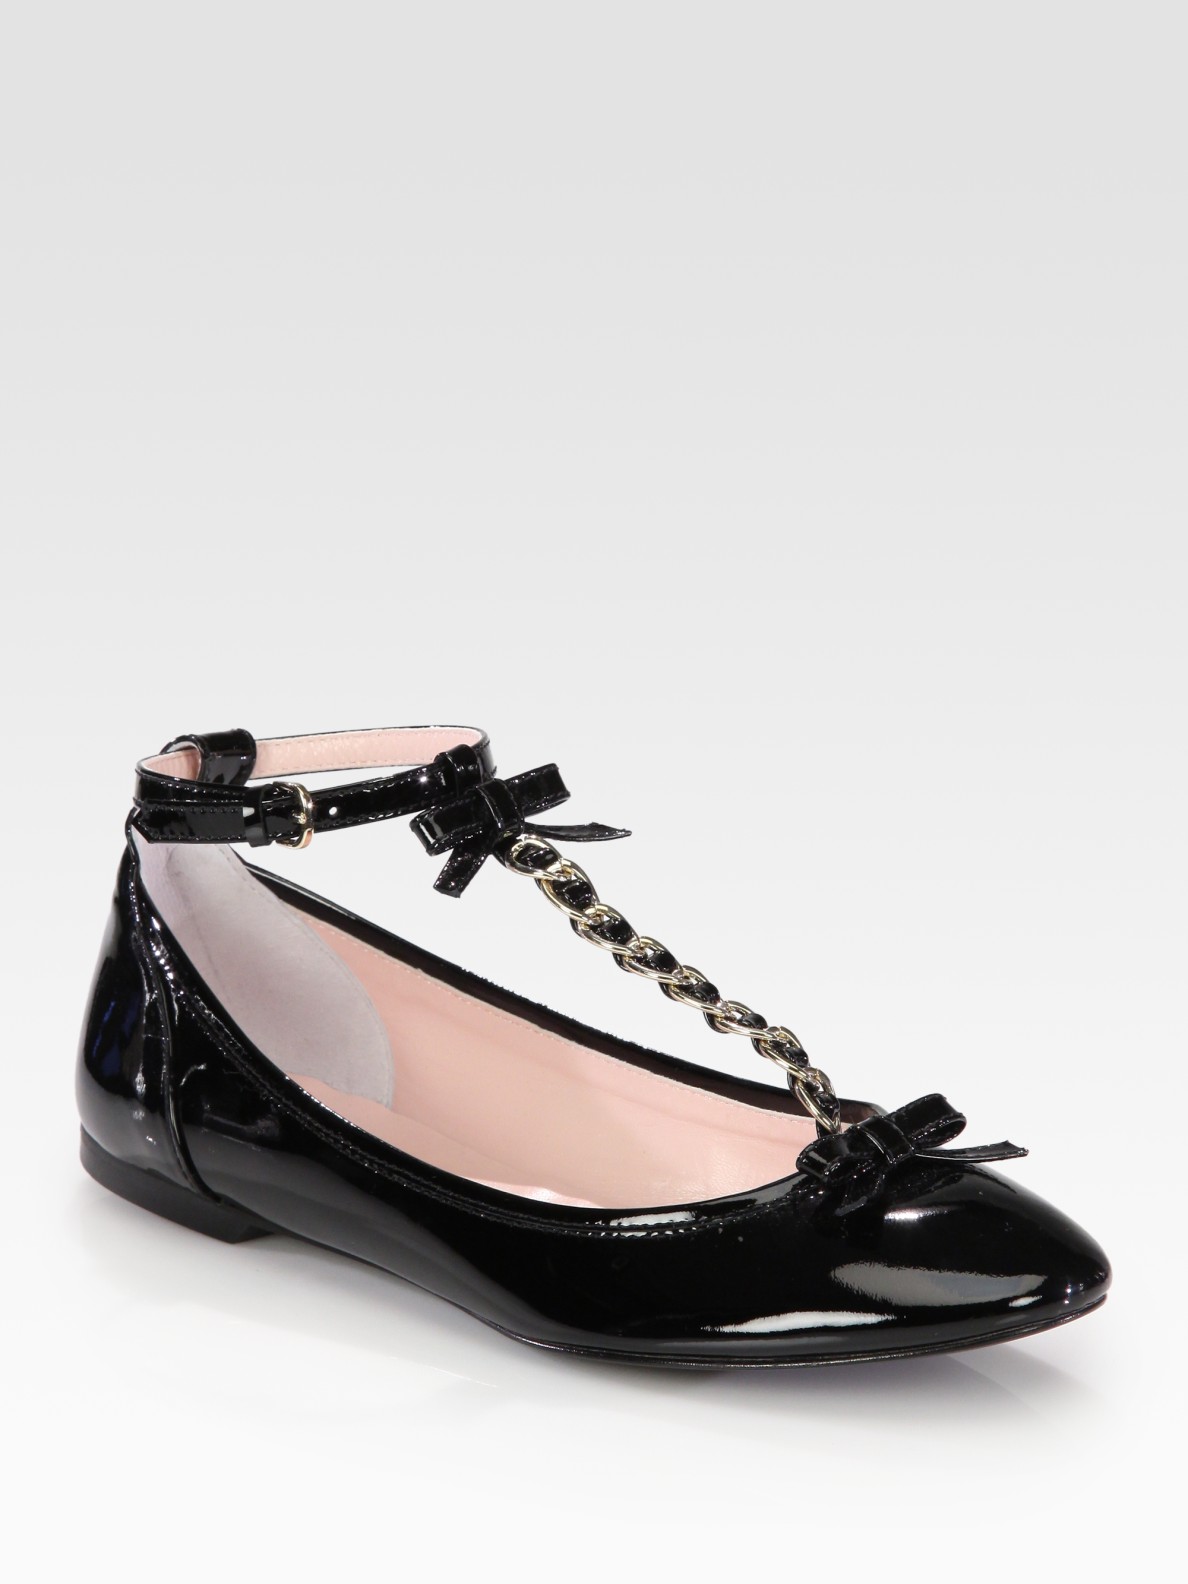 RED Patent Leather T-Strap Flats in Black - Lyst